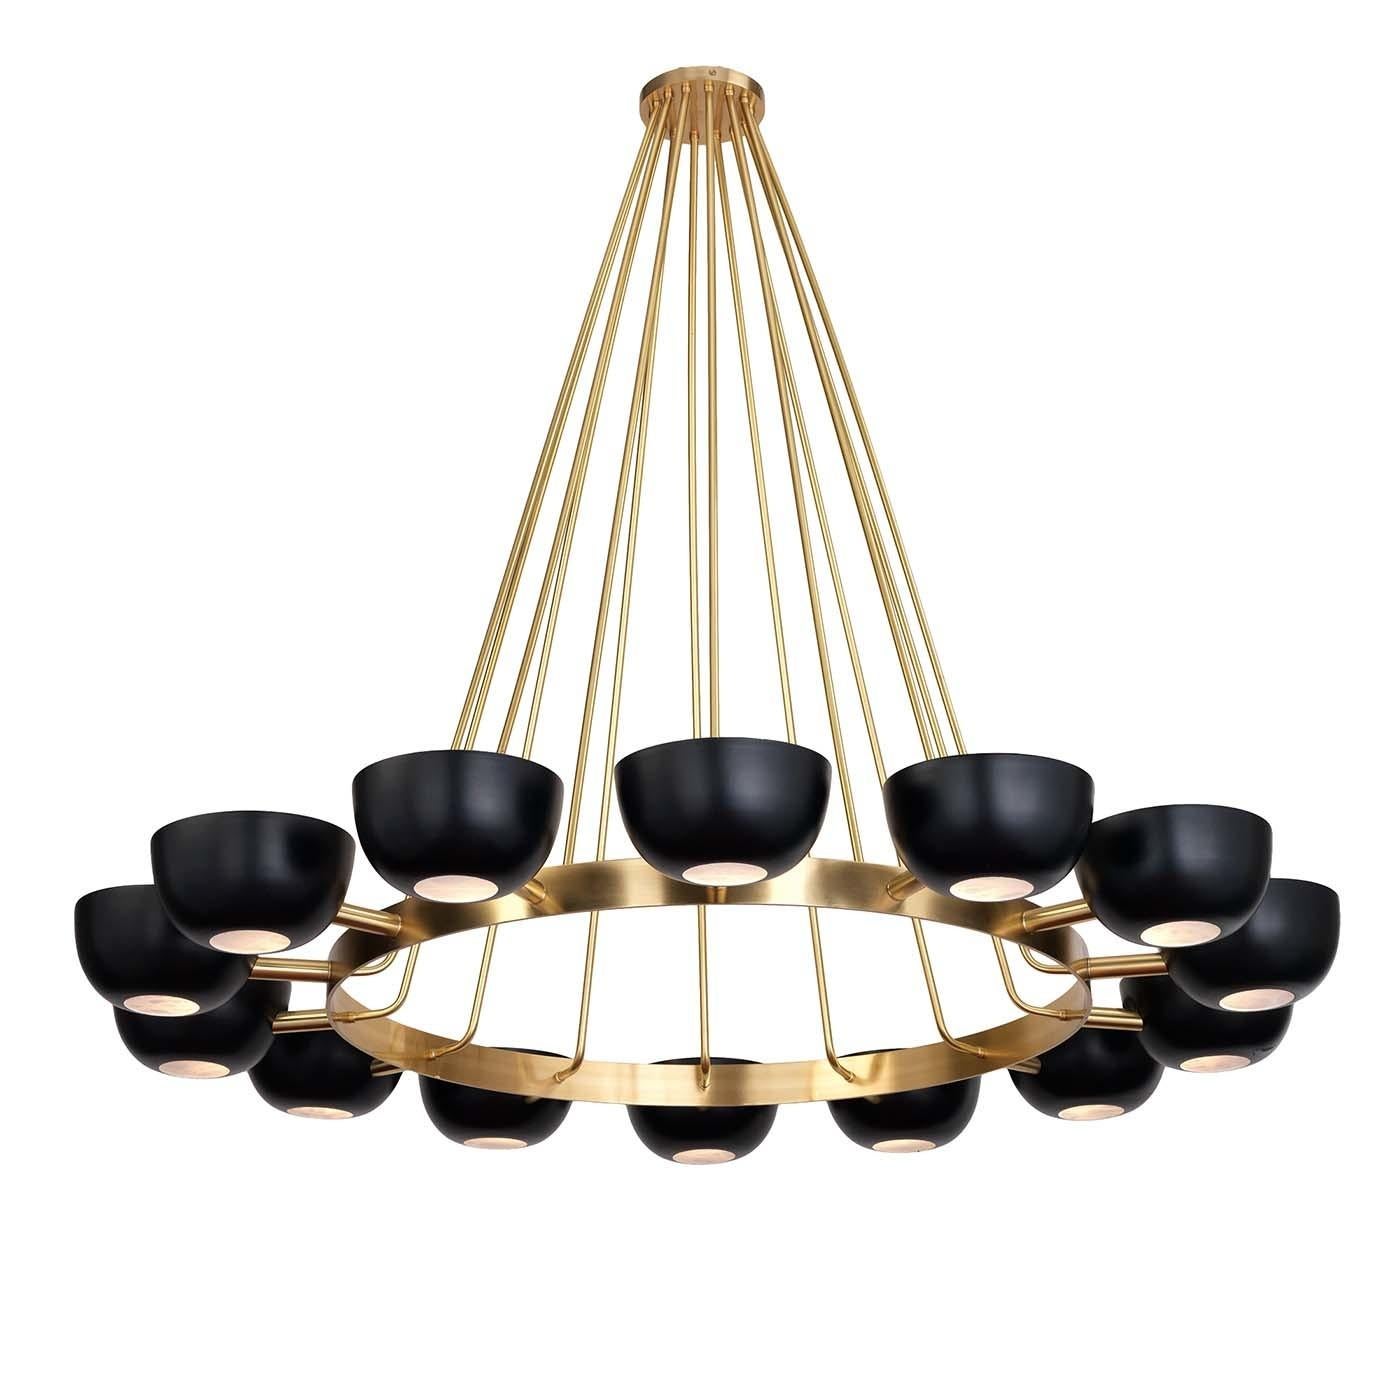 An exercise in balance and sophistication, this chandelier is an ideal decoration for a large living room when placed above a stately dining table. The structure is in brass with a natural finish and comprises a round base with 14 arms stemming from